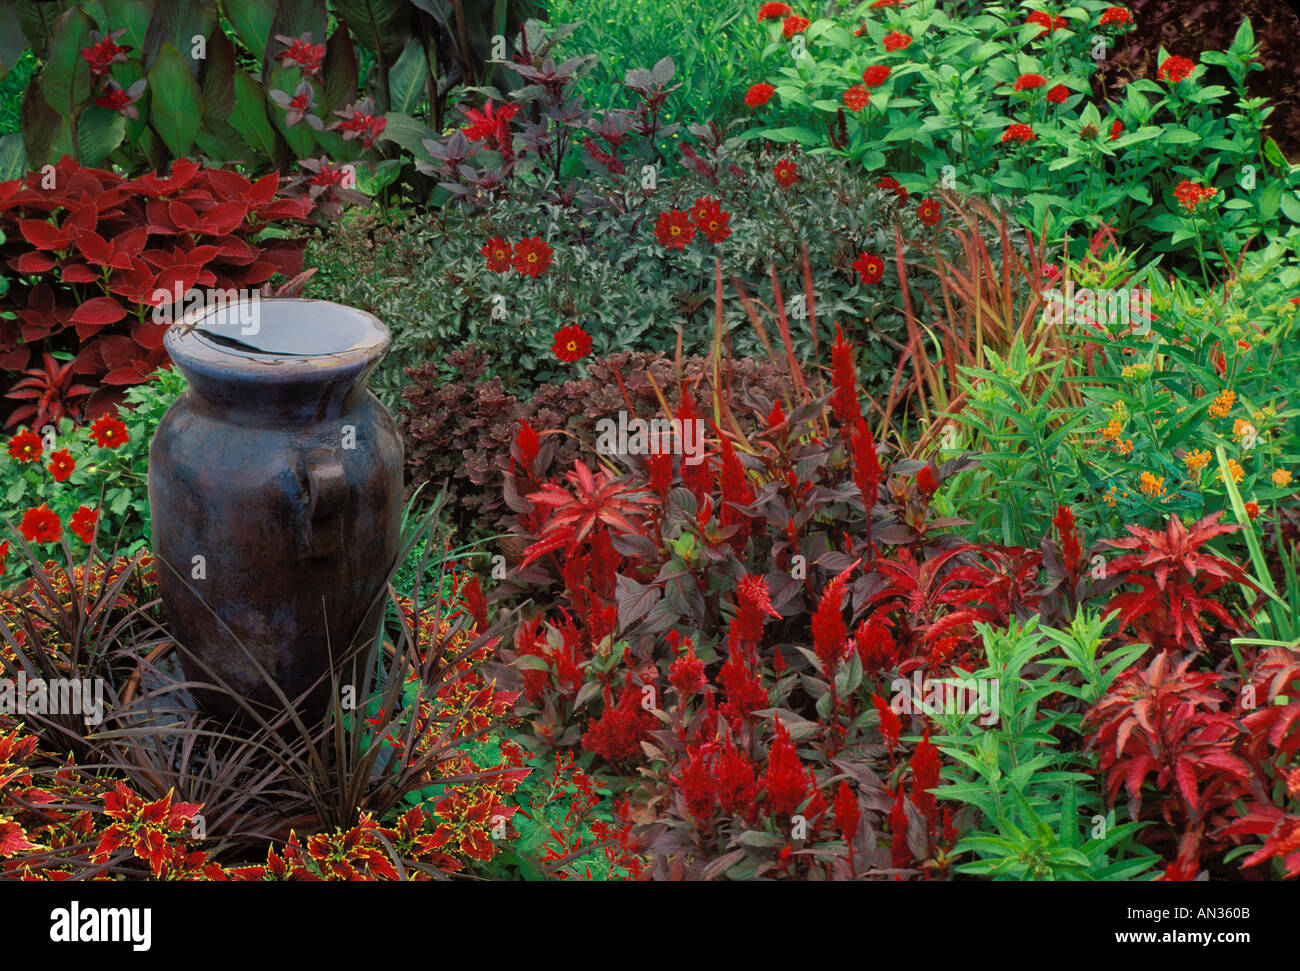 Flower garden in vibrant red and orange colors and tall ceramic vase as water fountain Missouri USA Stock Photo